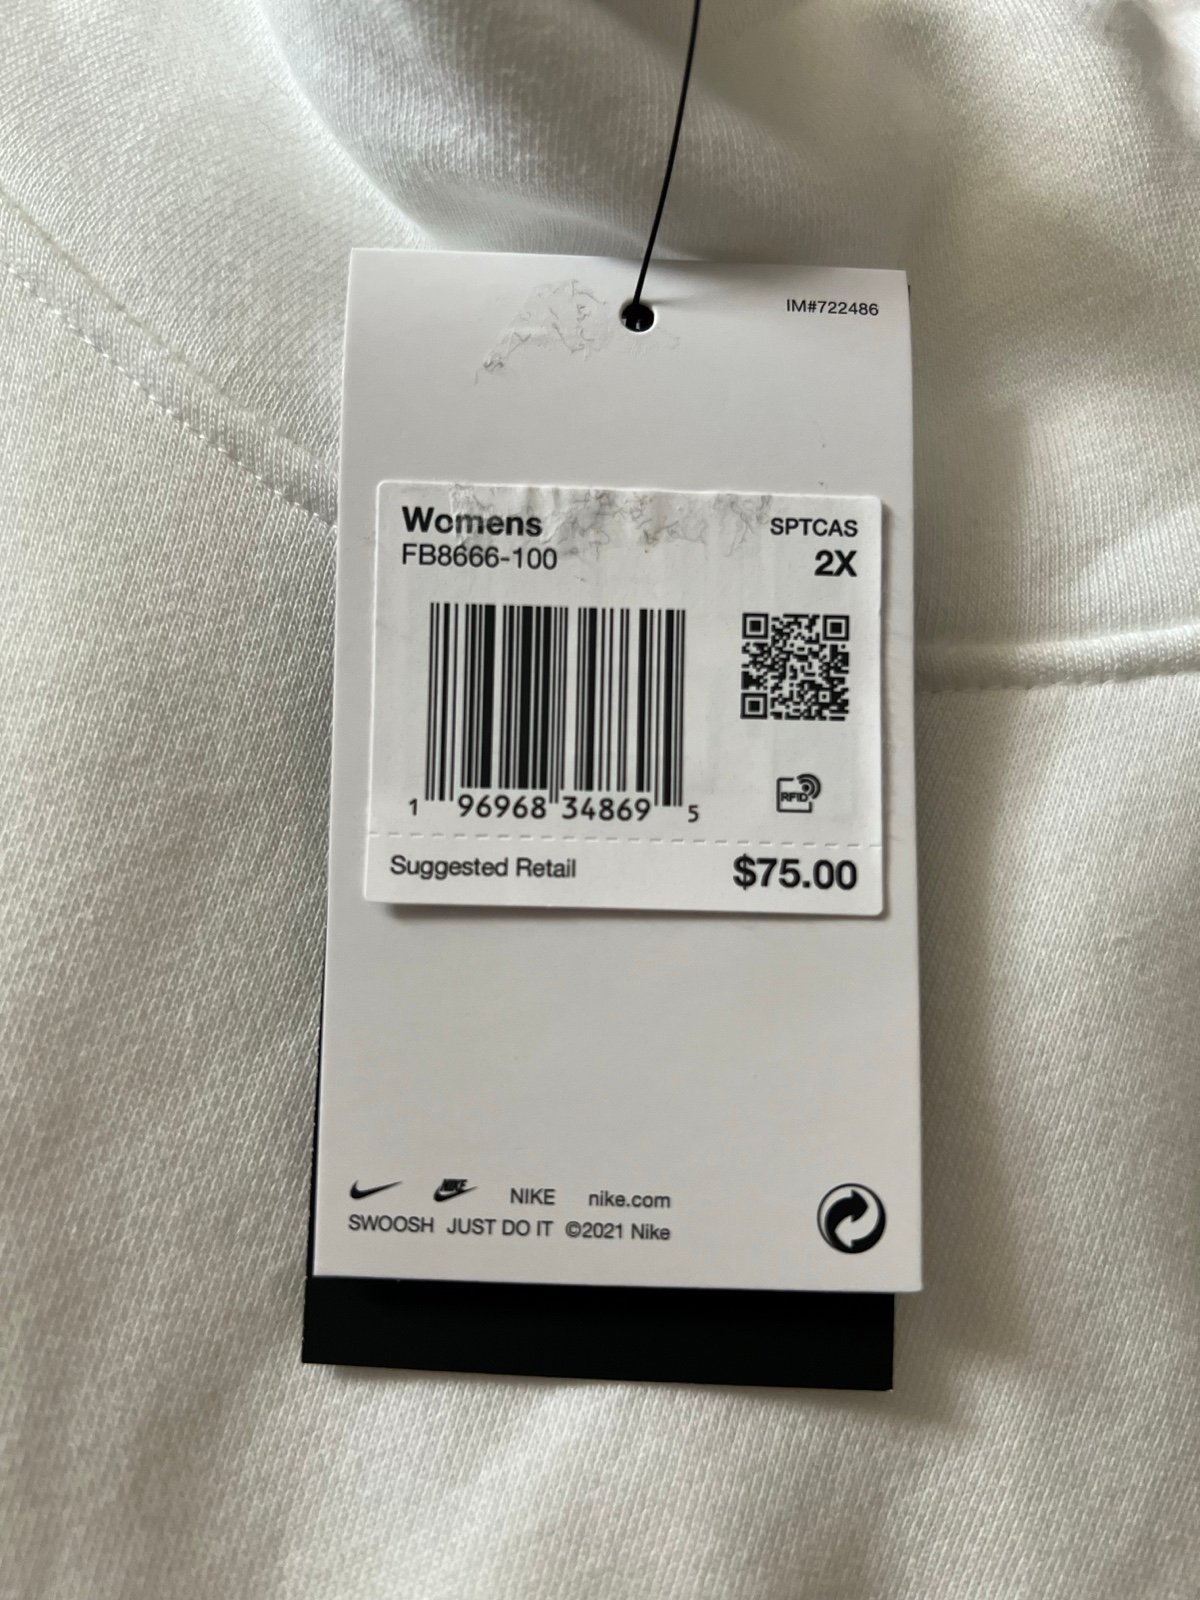 high discount Nike Club Fleece Funnel Neck Pullover Sweatshit-Size 2X oUKIVKfY2 New Style